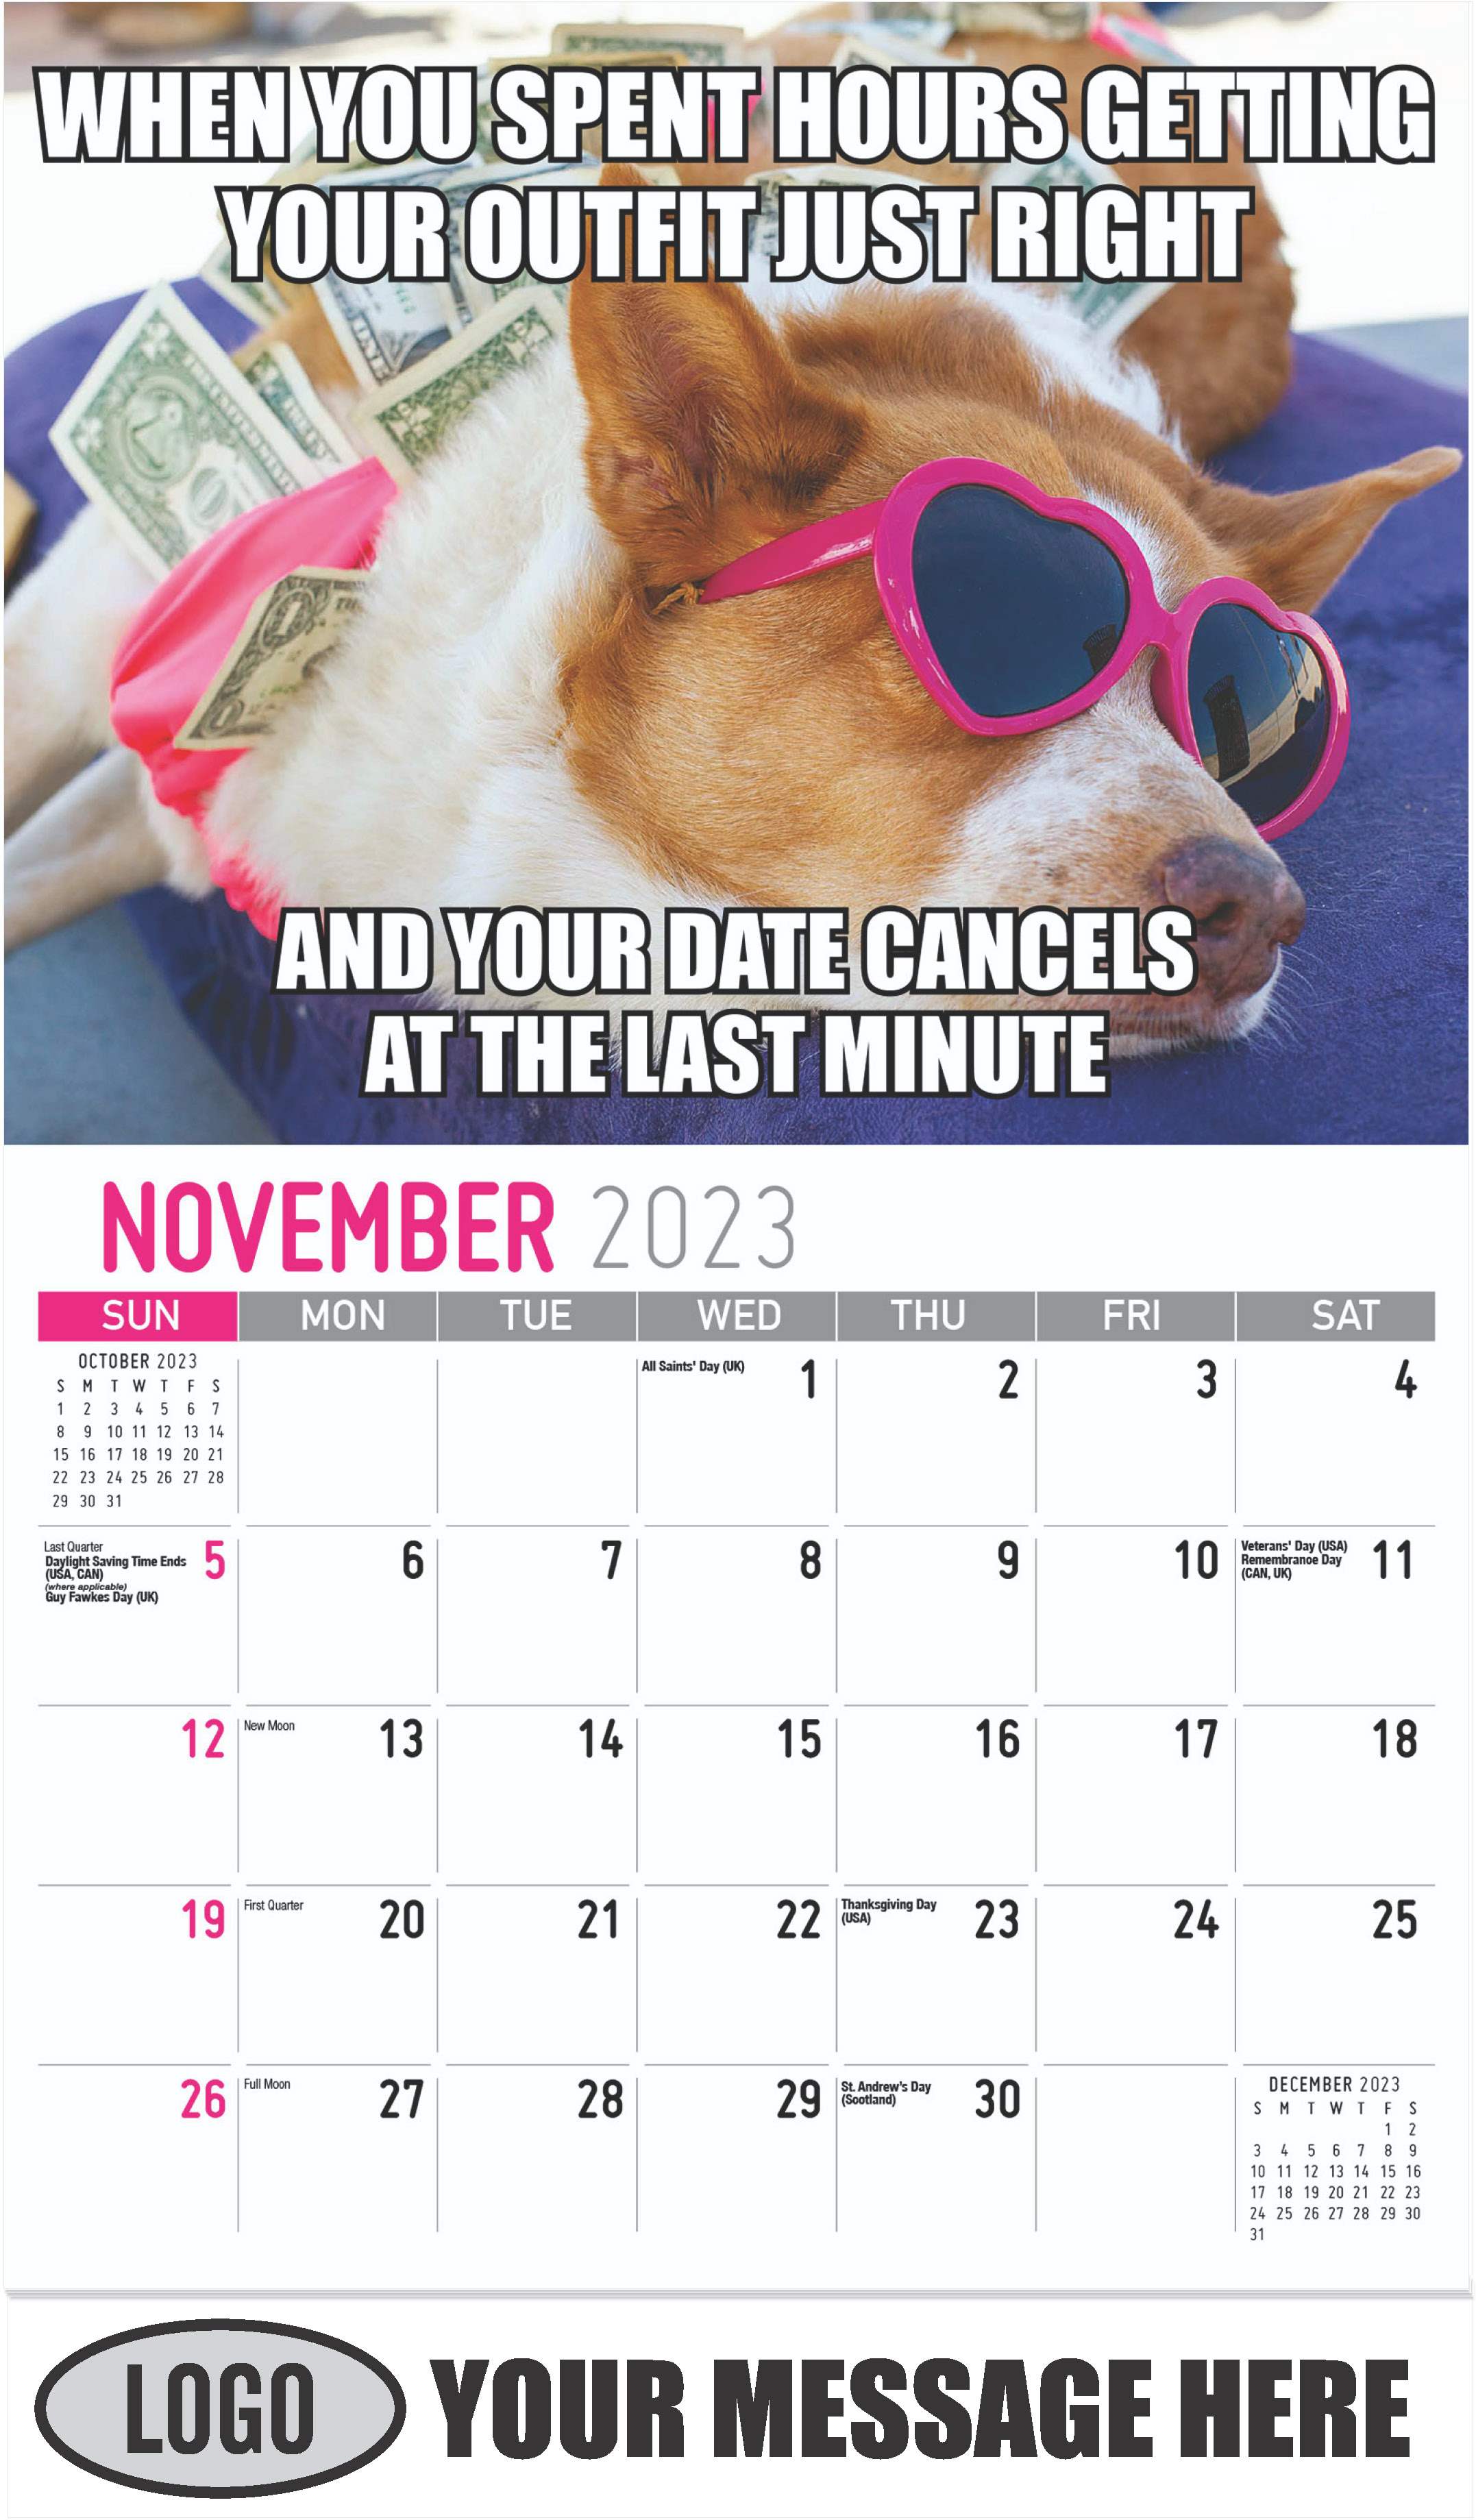 STOP MONKEYING AROUND! - November - The Memeing of Life 2023 Promotional Calendar